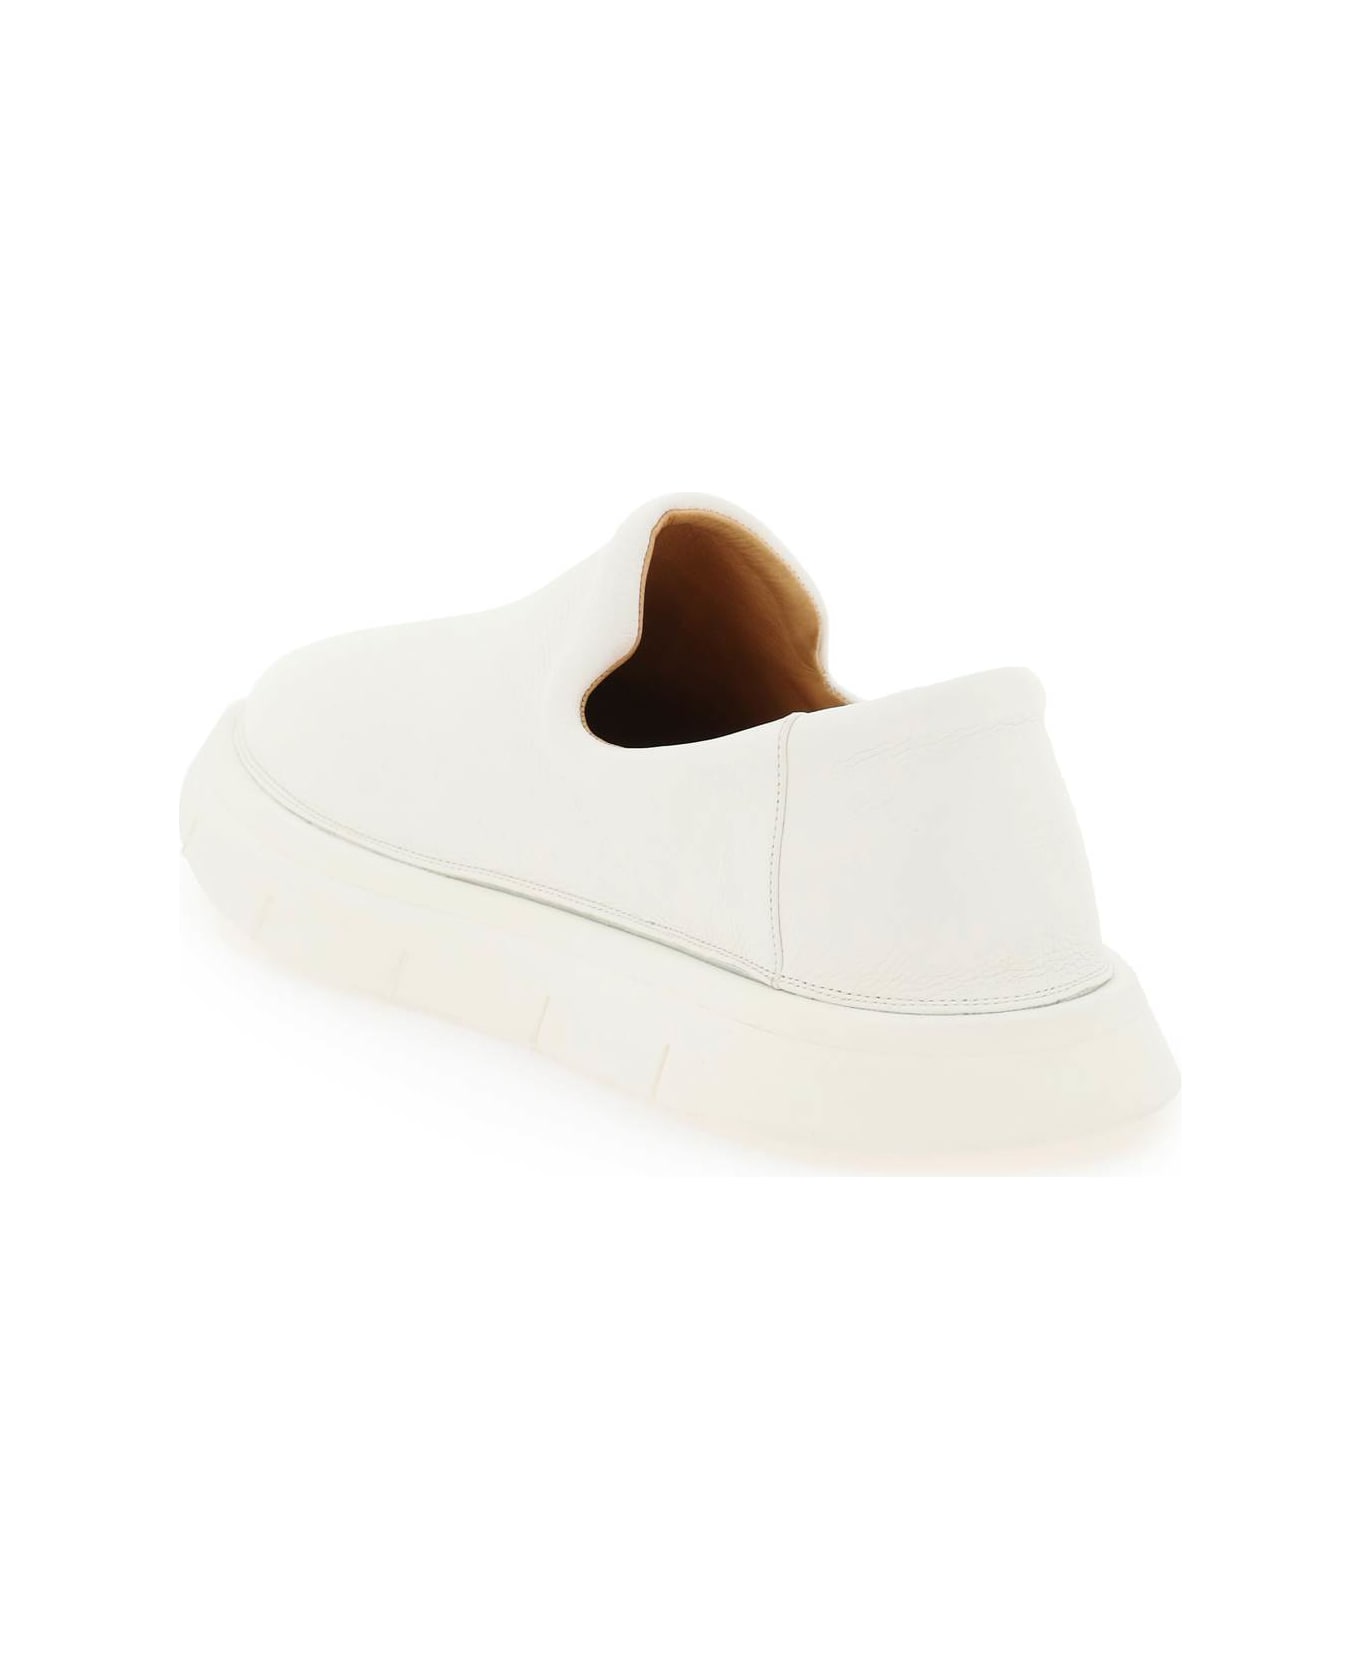 Marsell 'intagliata' Grained Leather Slip-on Shoes - BIANCO OPTICAL (White) スニーカー